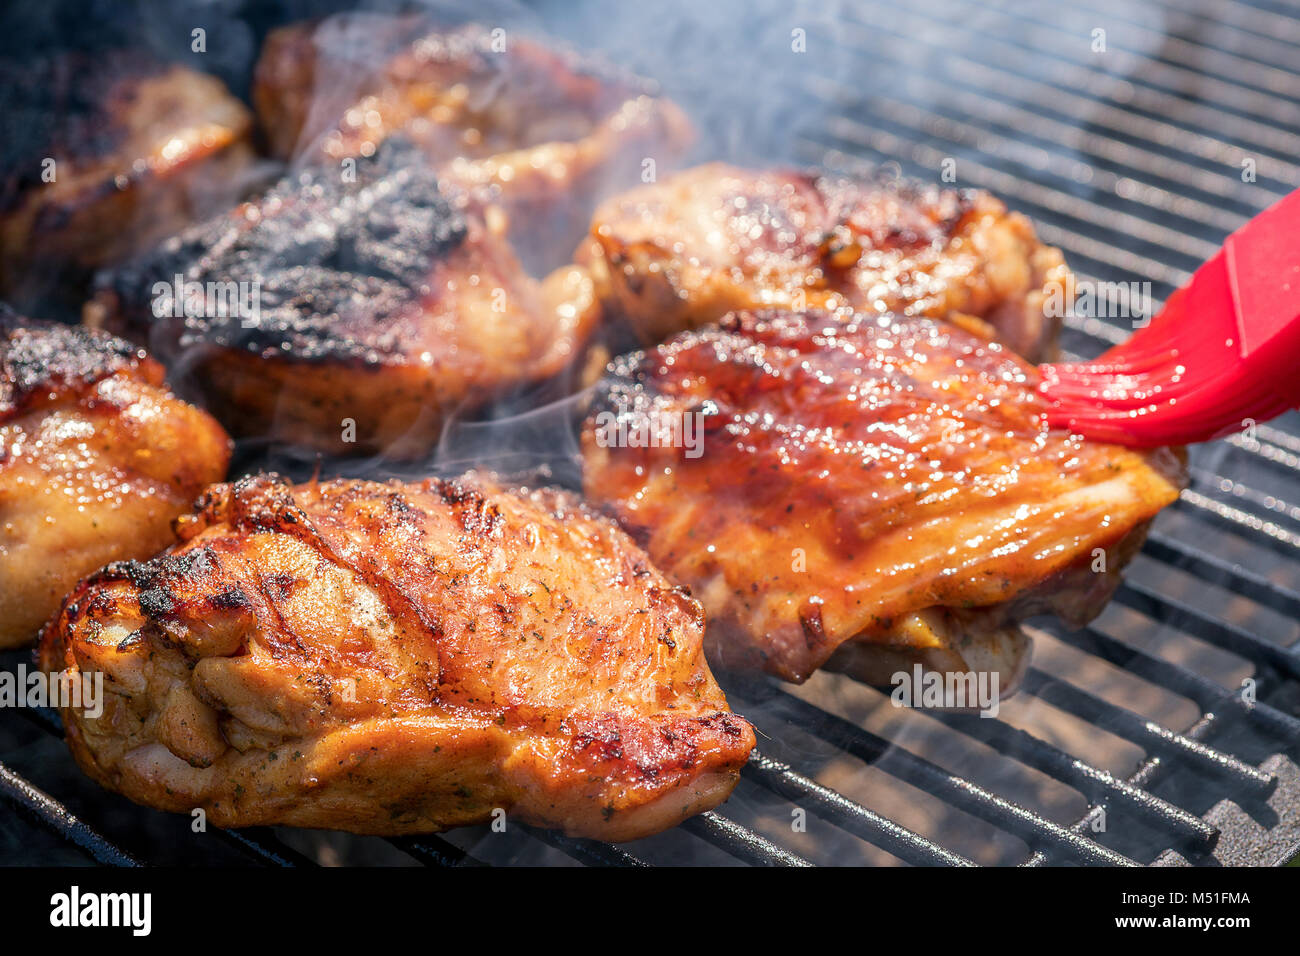 Grilled chicken thigh on the flaming grill Stock Photo